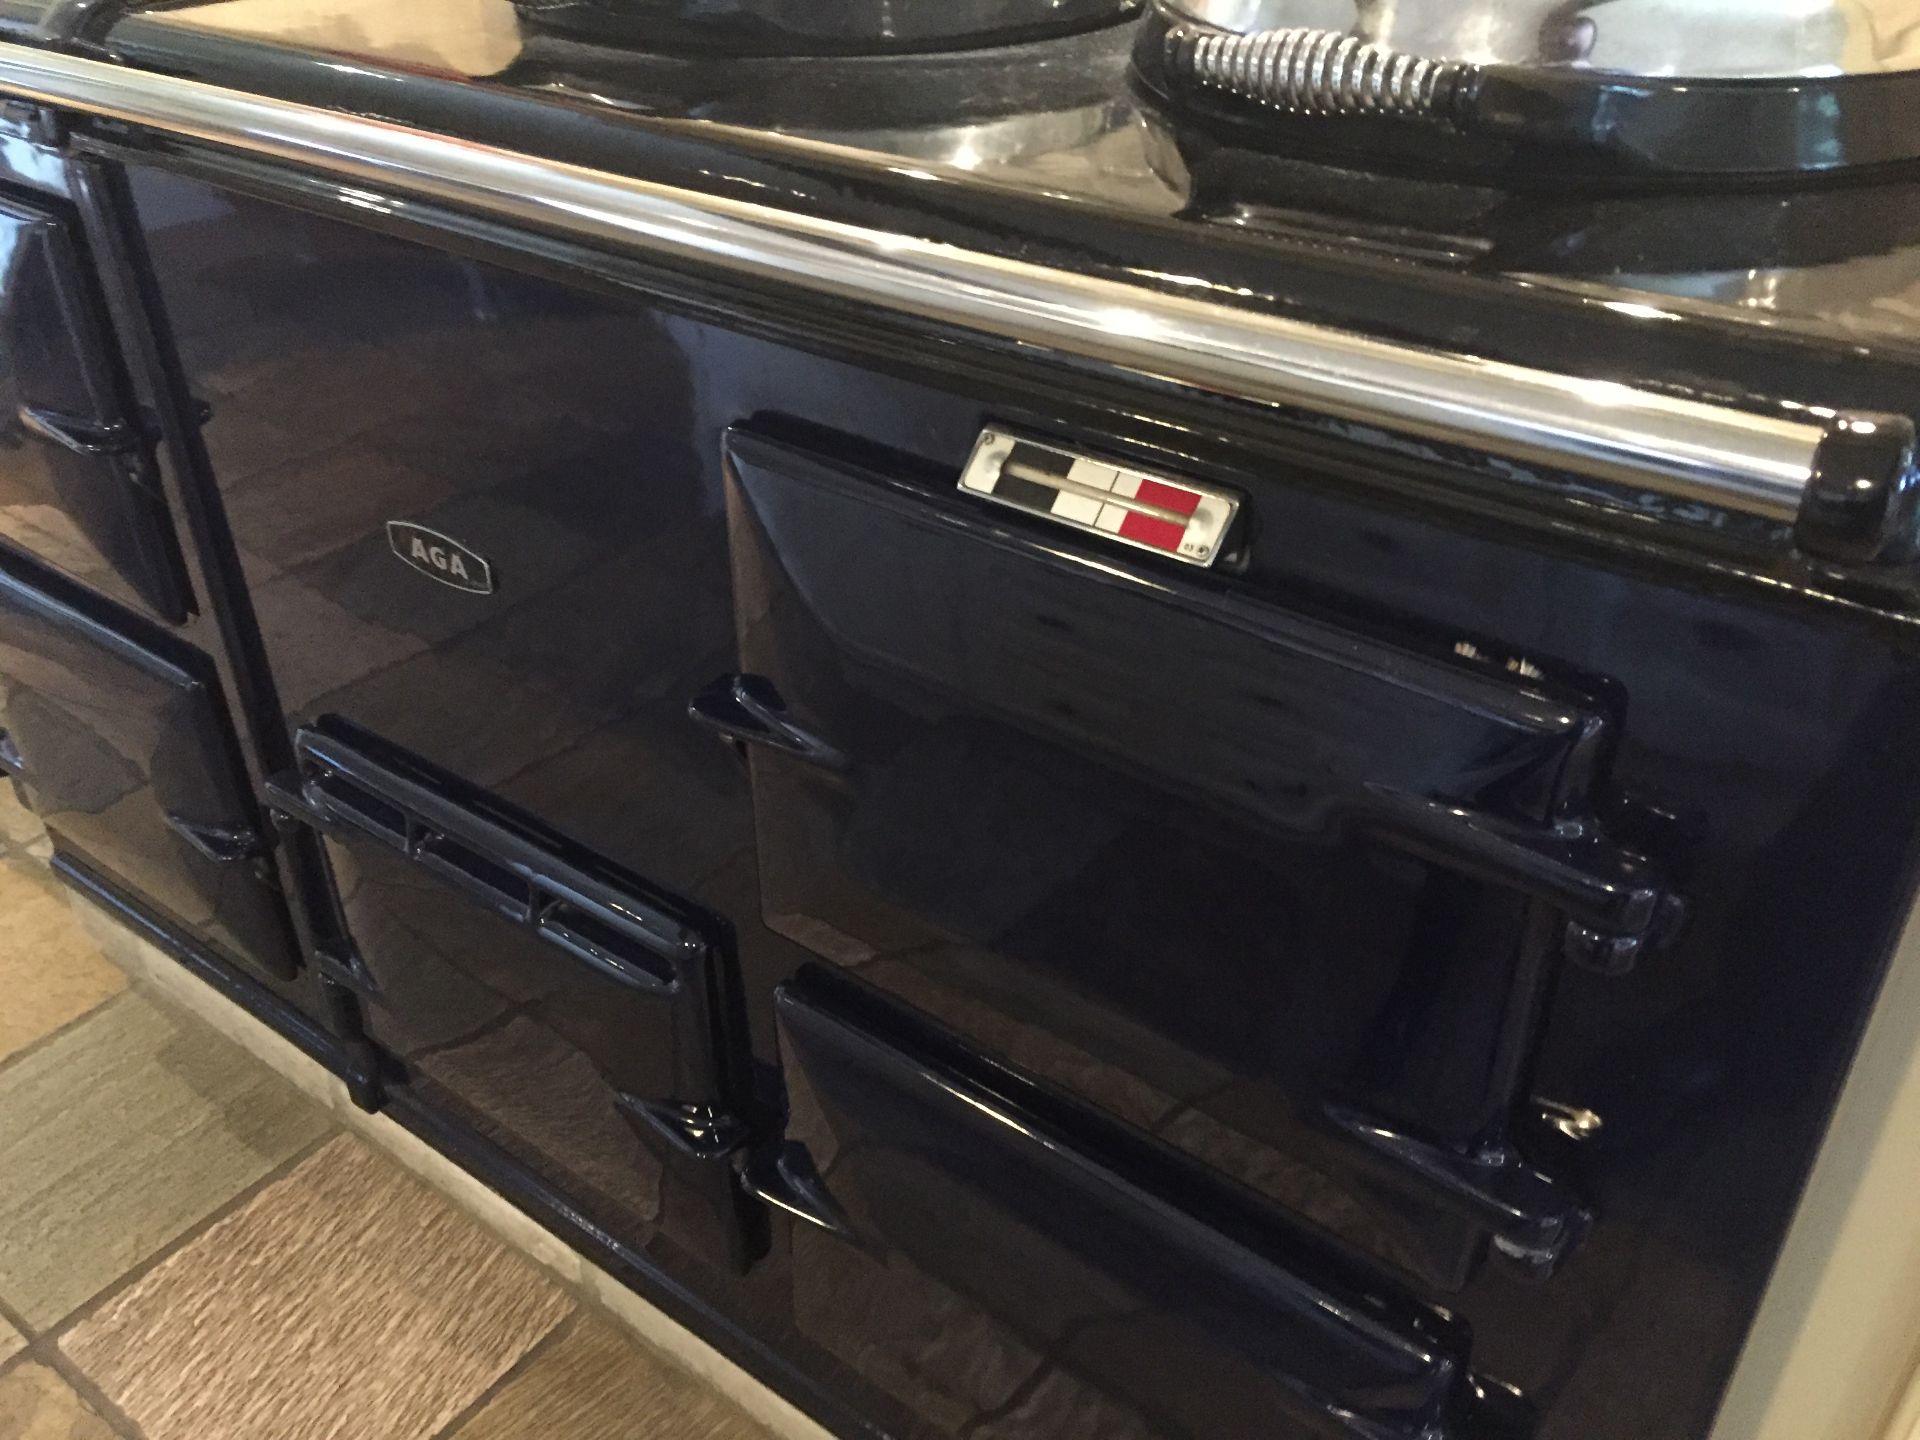 1 x Aga 4-Oven, 3-Plate Dual-Fuel Range Cooker - Cast Iron With Navy Enamel Finish With A Black - Image 11 of 21